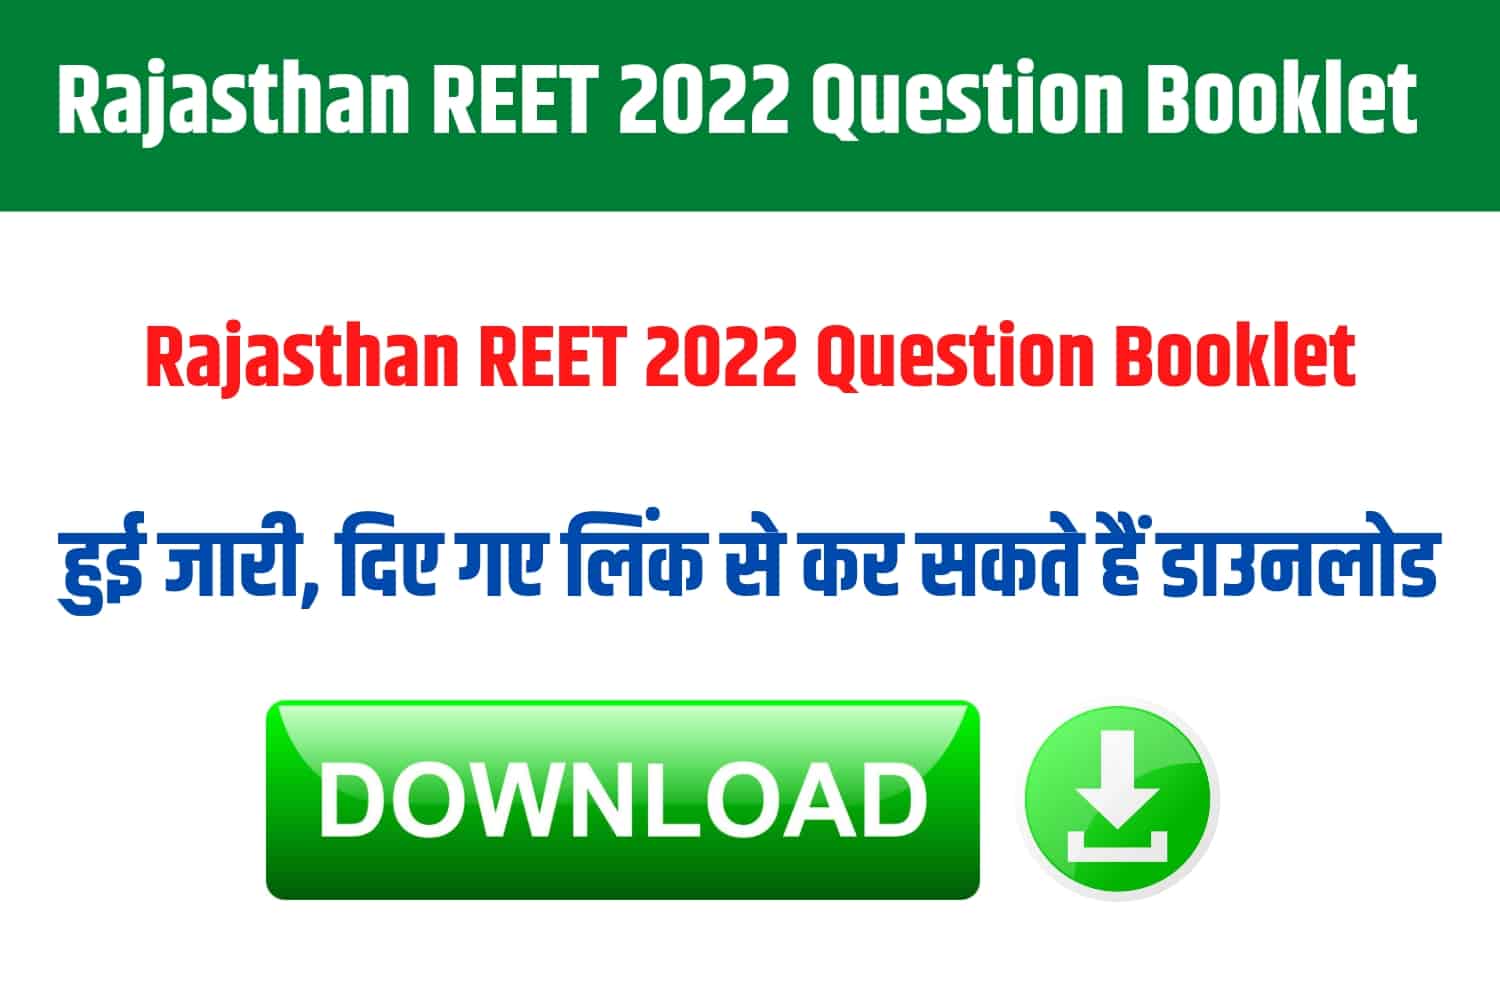 Rajasthan REET 2022 Question Booklet